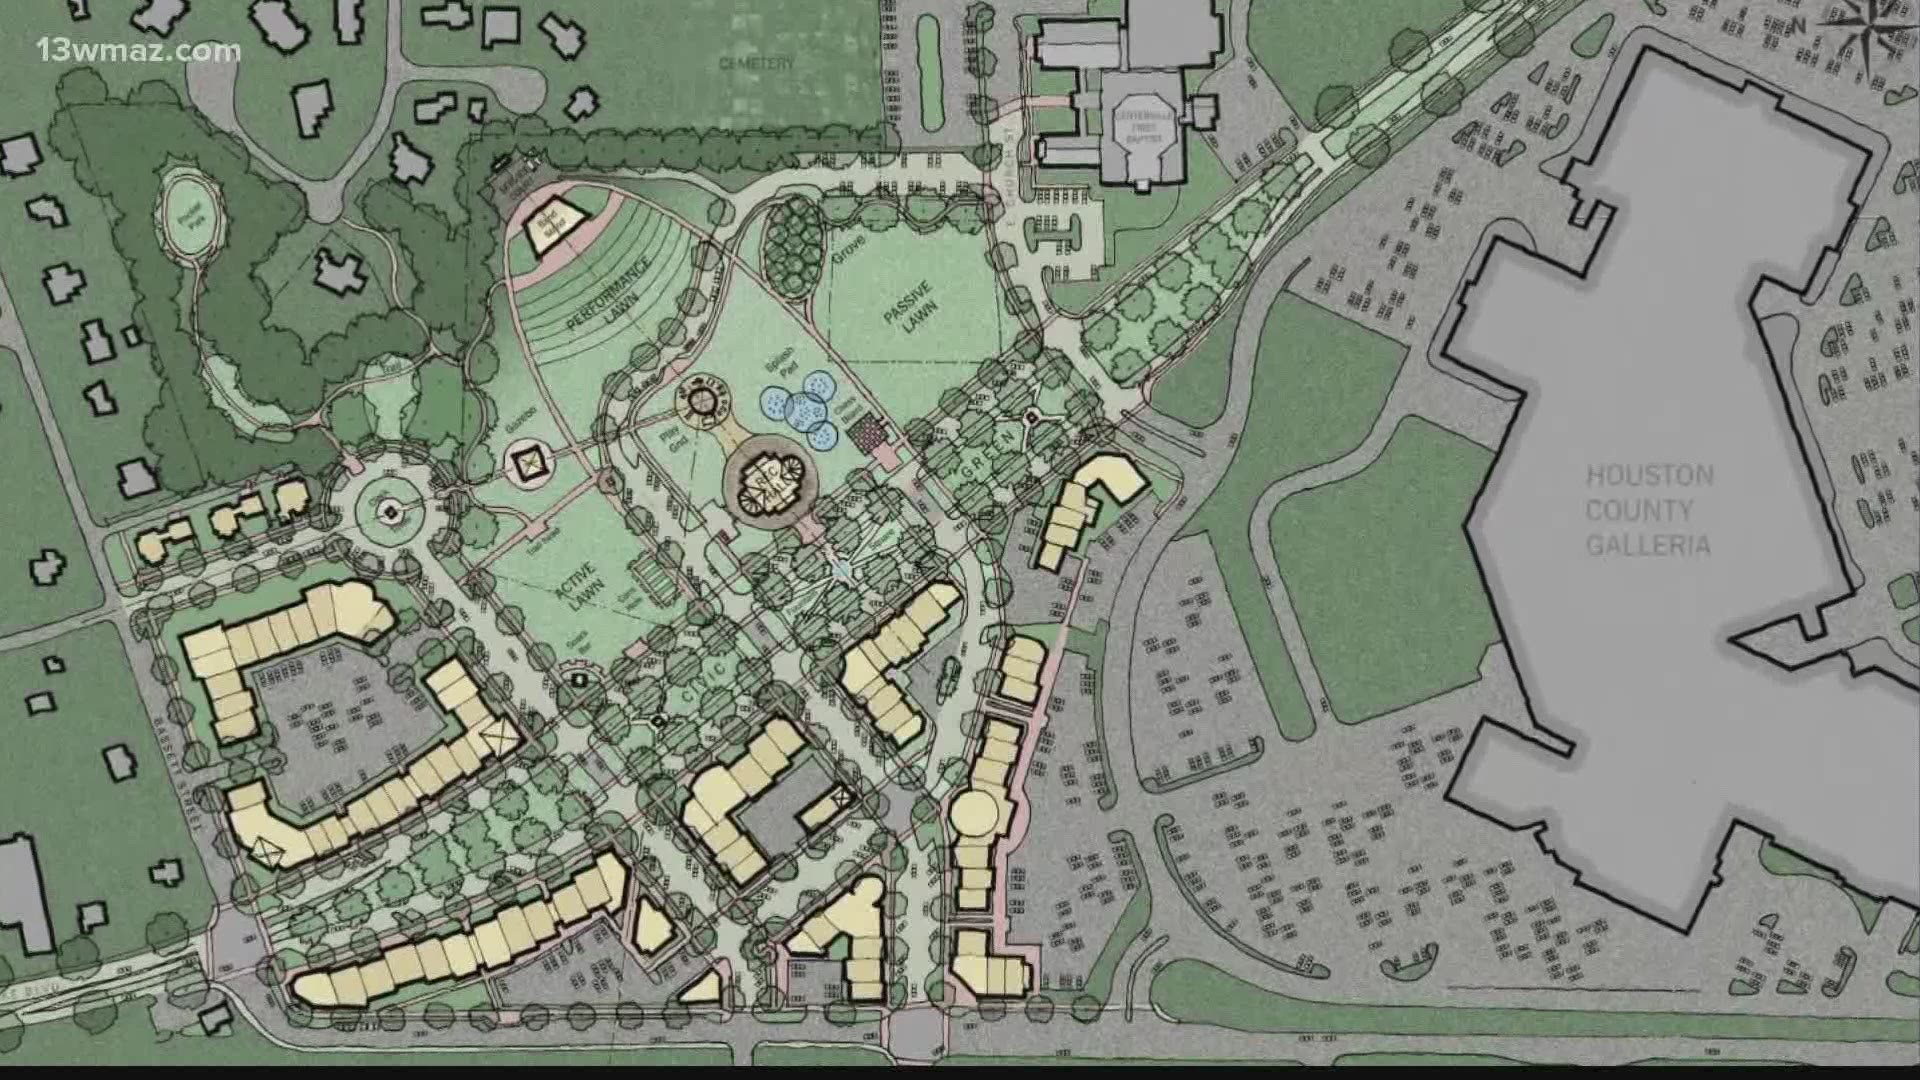 Councilman Justin Wright says the city is hoping to further develop land around the Houston County Galleria mall and give the city somewhat of a downtown area.